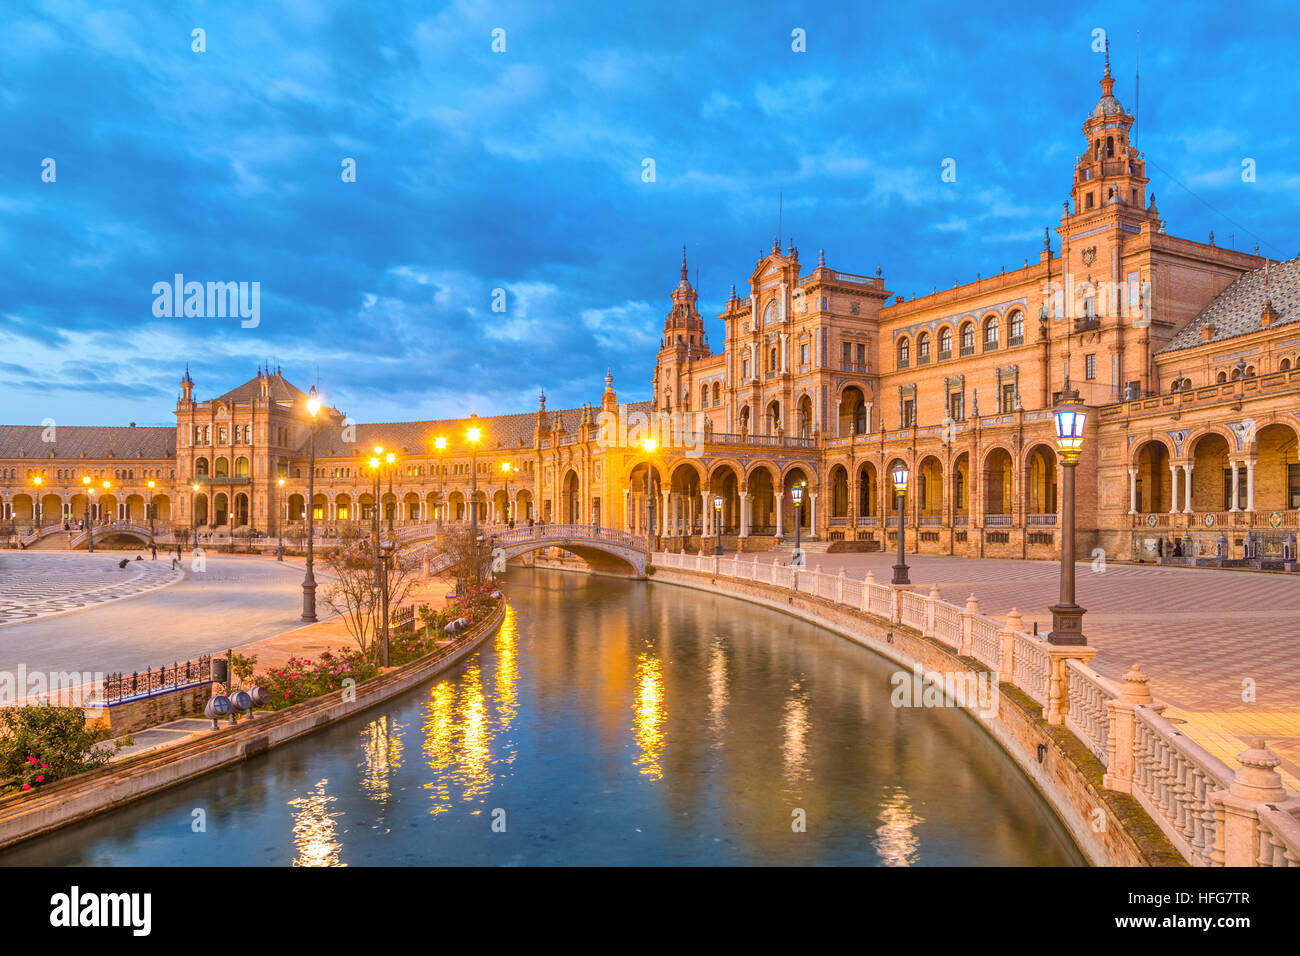 Canal and bridge reflecing in water on Plaza de Espana in the evening, Seville, Andalusia, Spain Stock Photo